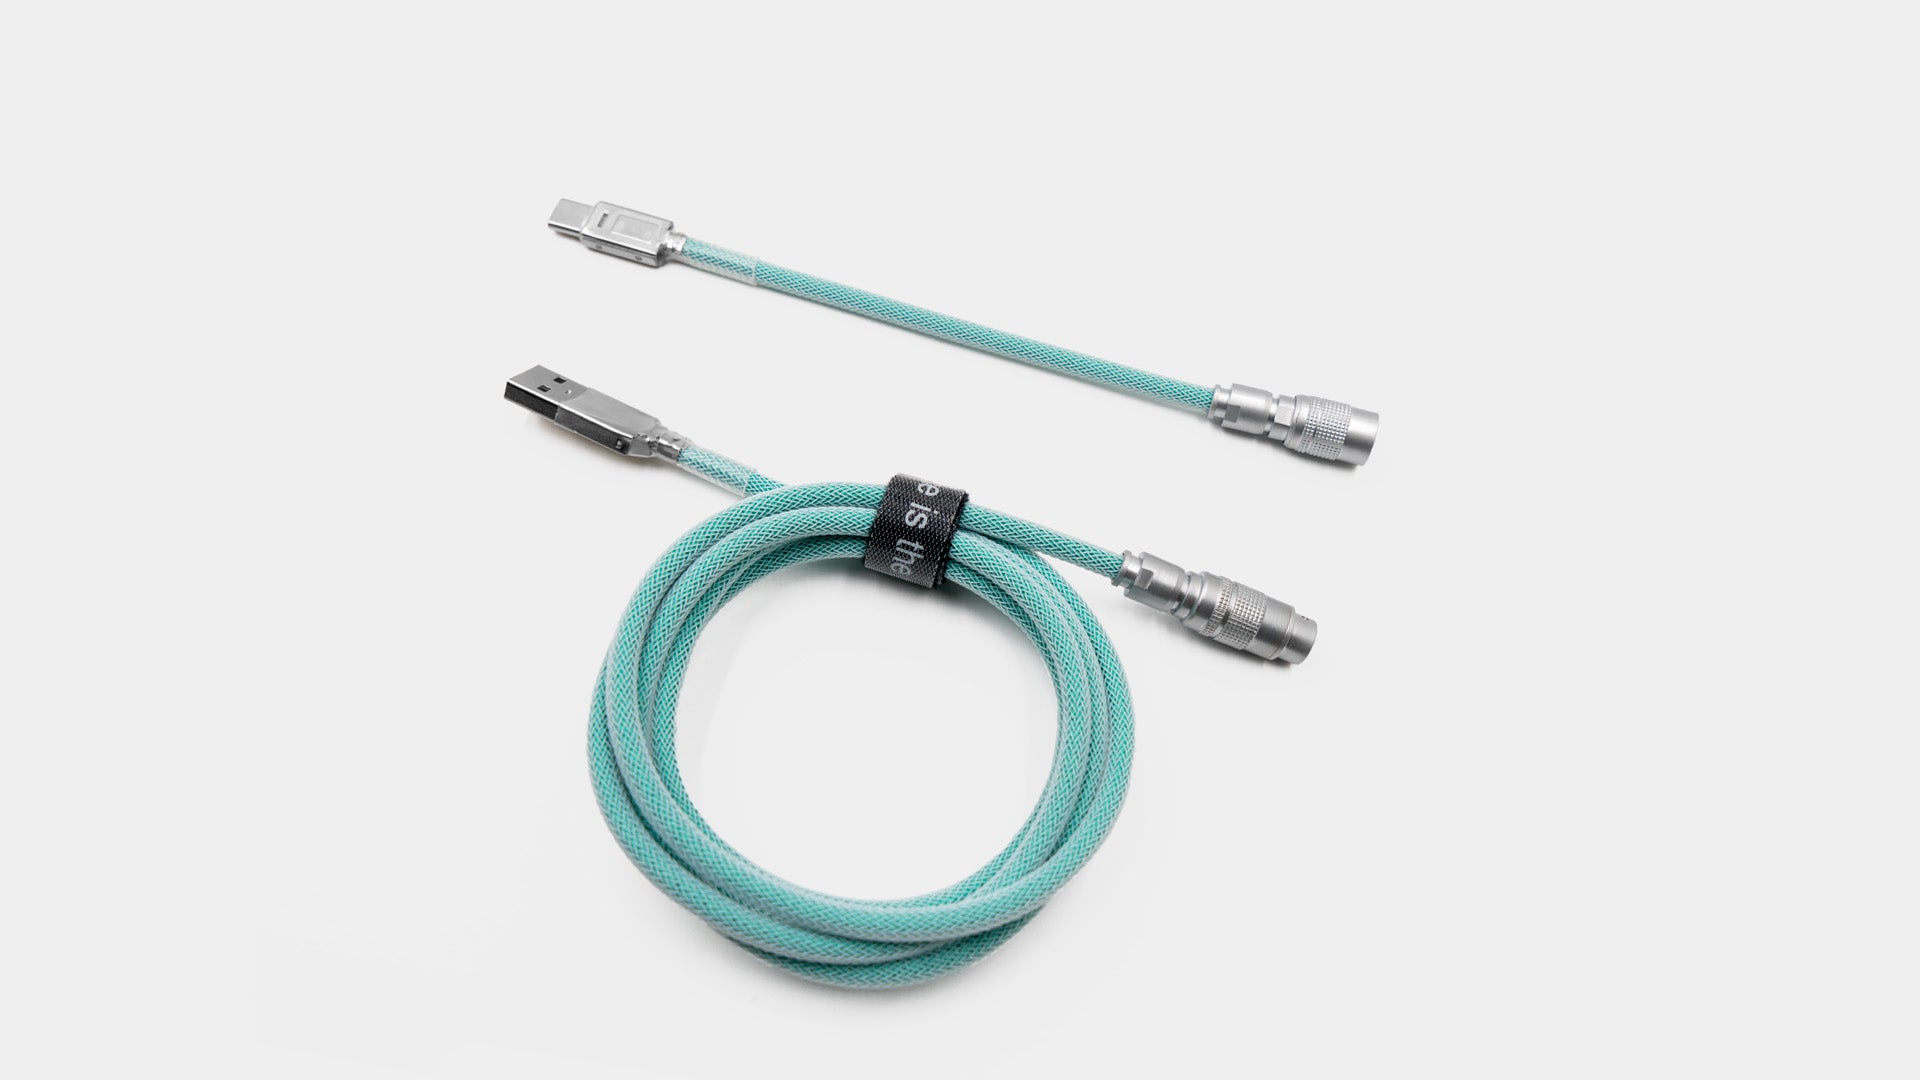 SEAFOAM YC8 CABLE-Space Cables-coiled keyboard cable-coiled usb c cable-coiled cable keyboard